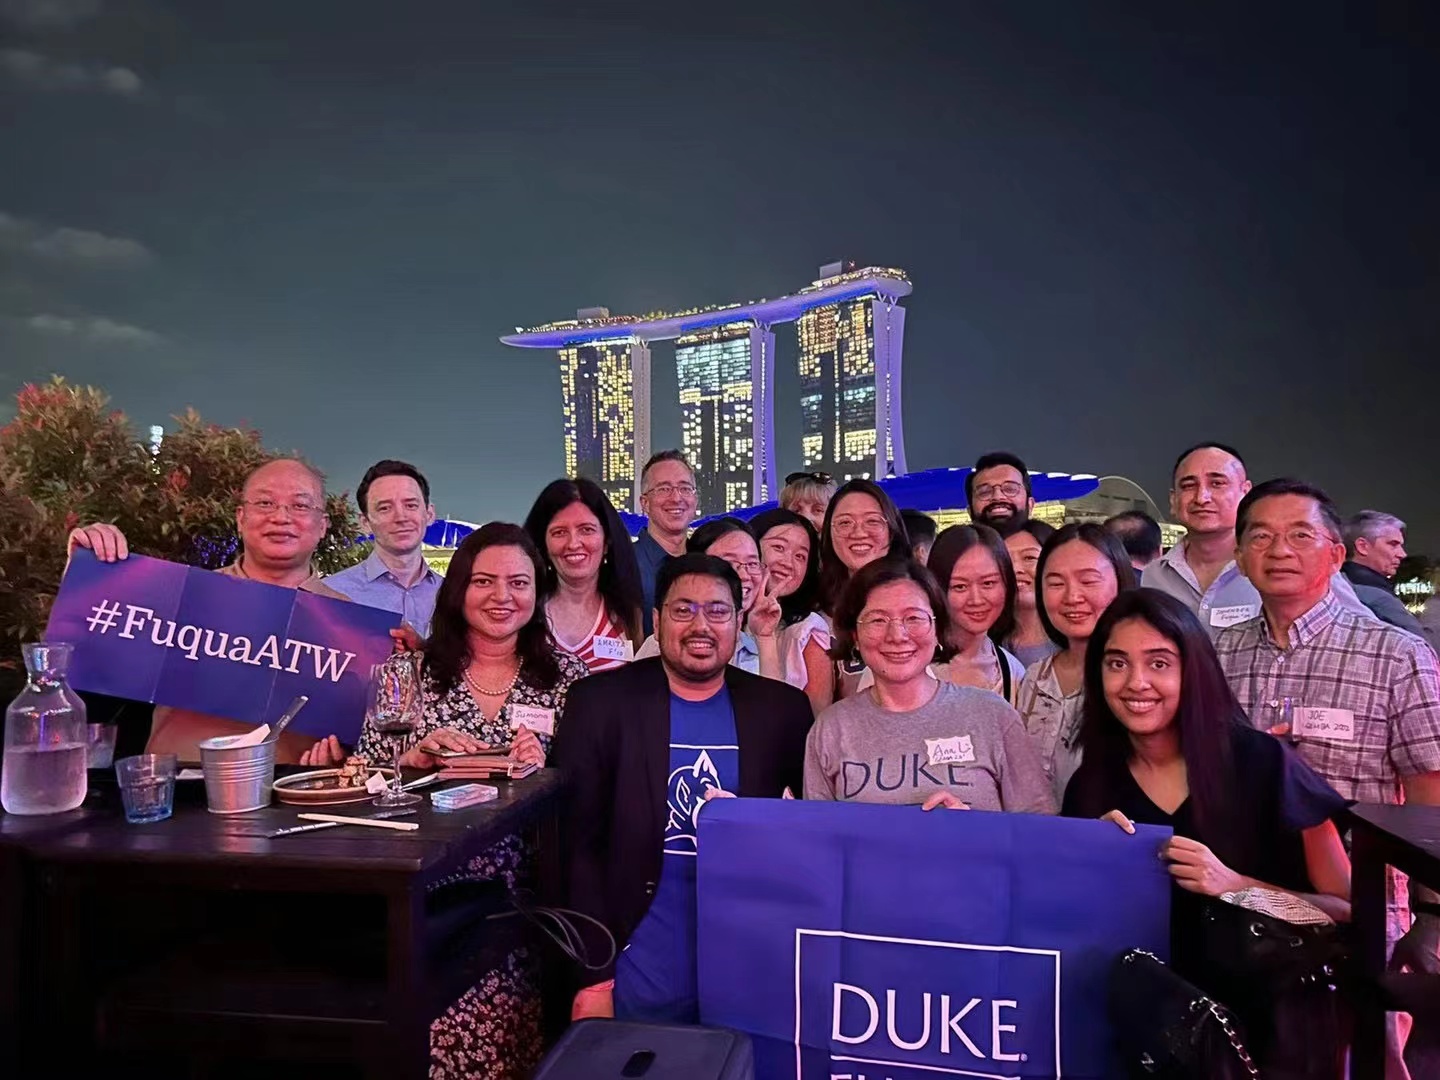 #FuquaATW participants posing for a group photo with the Singapore skyline in the background.